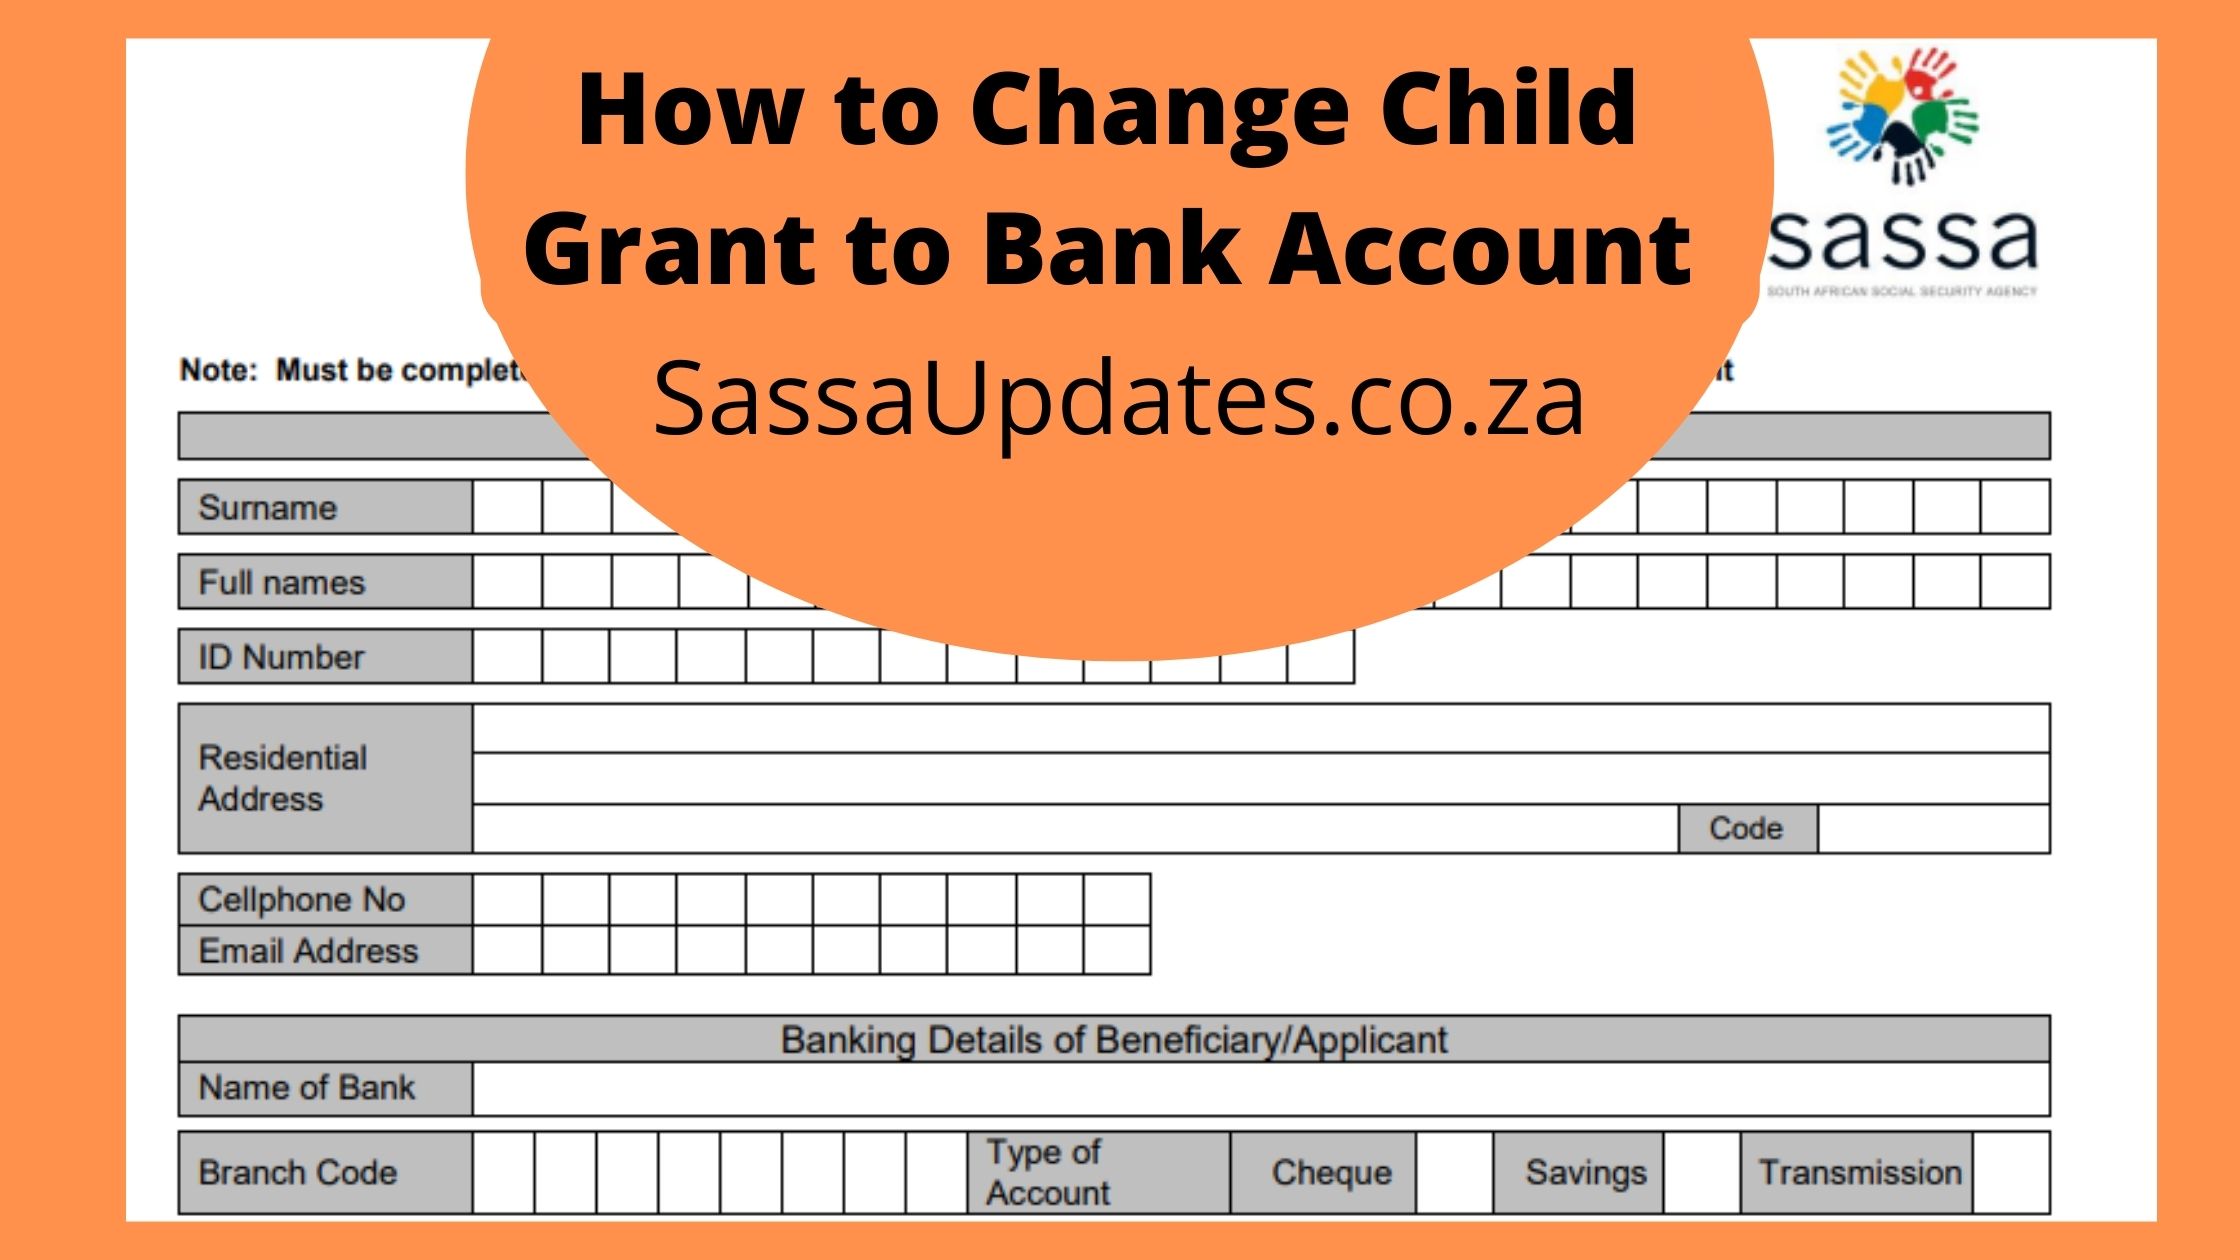 How to Change Child Grant to Bank Account